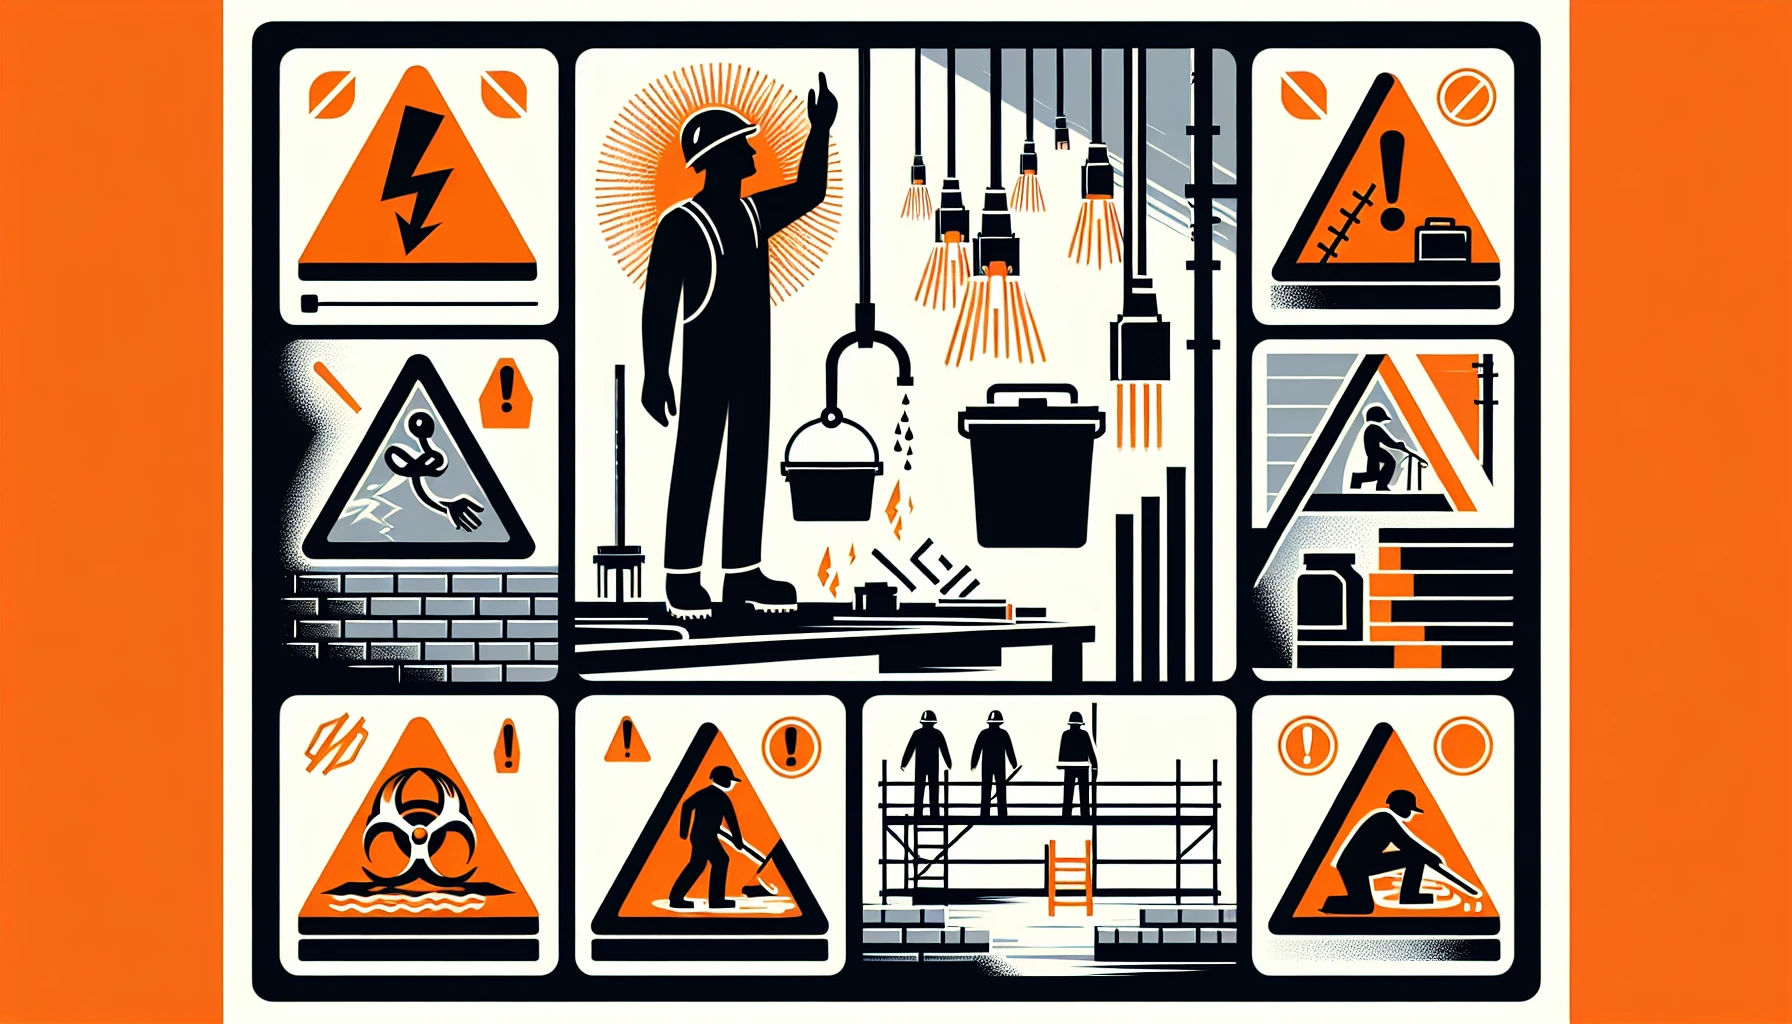 Construction field management illustration with worker and safety hazards